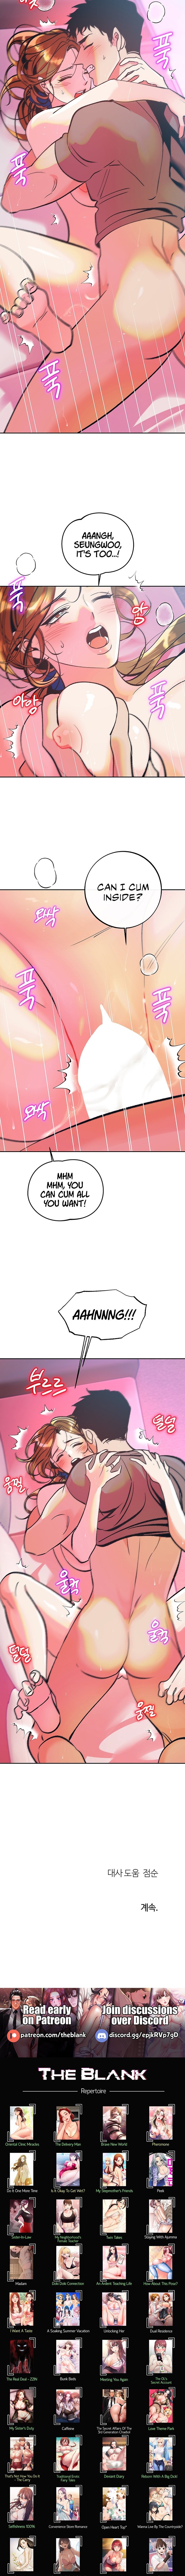 the-memories-of-that-summer-day-chap-30-9